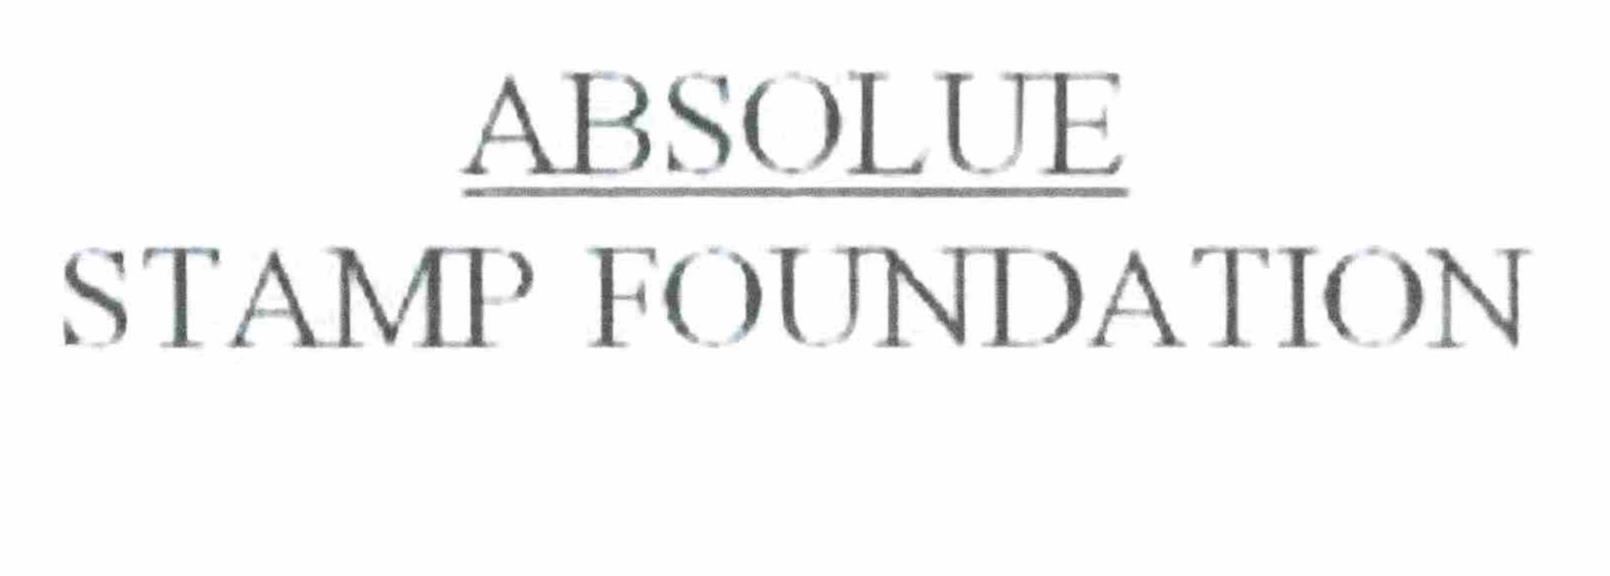  ABSOLUE STAMP FOUNDATION